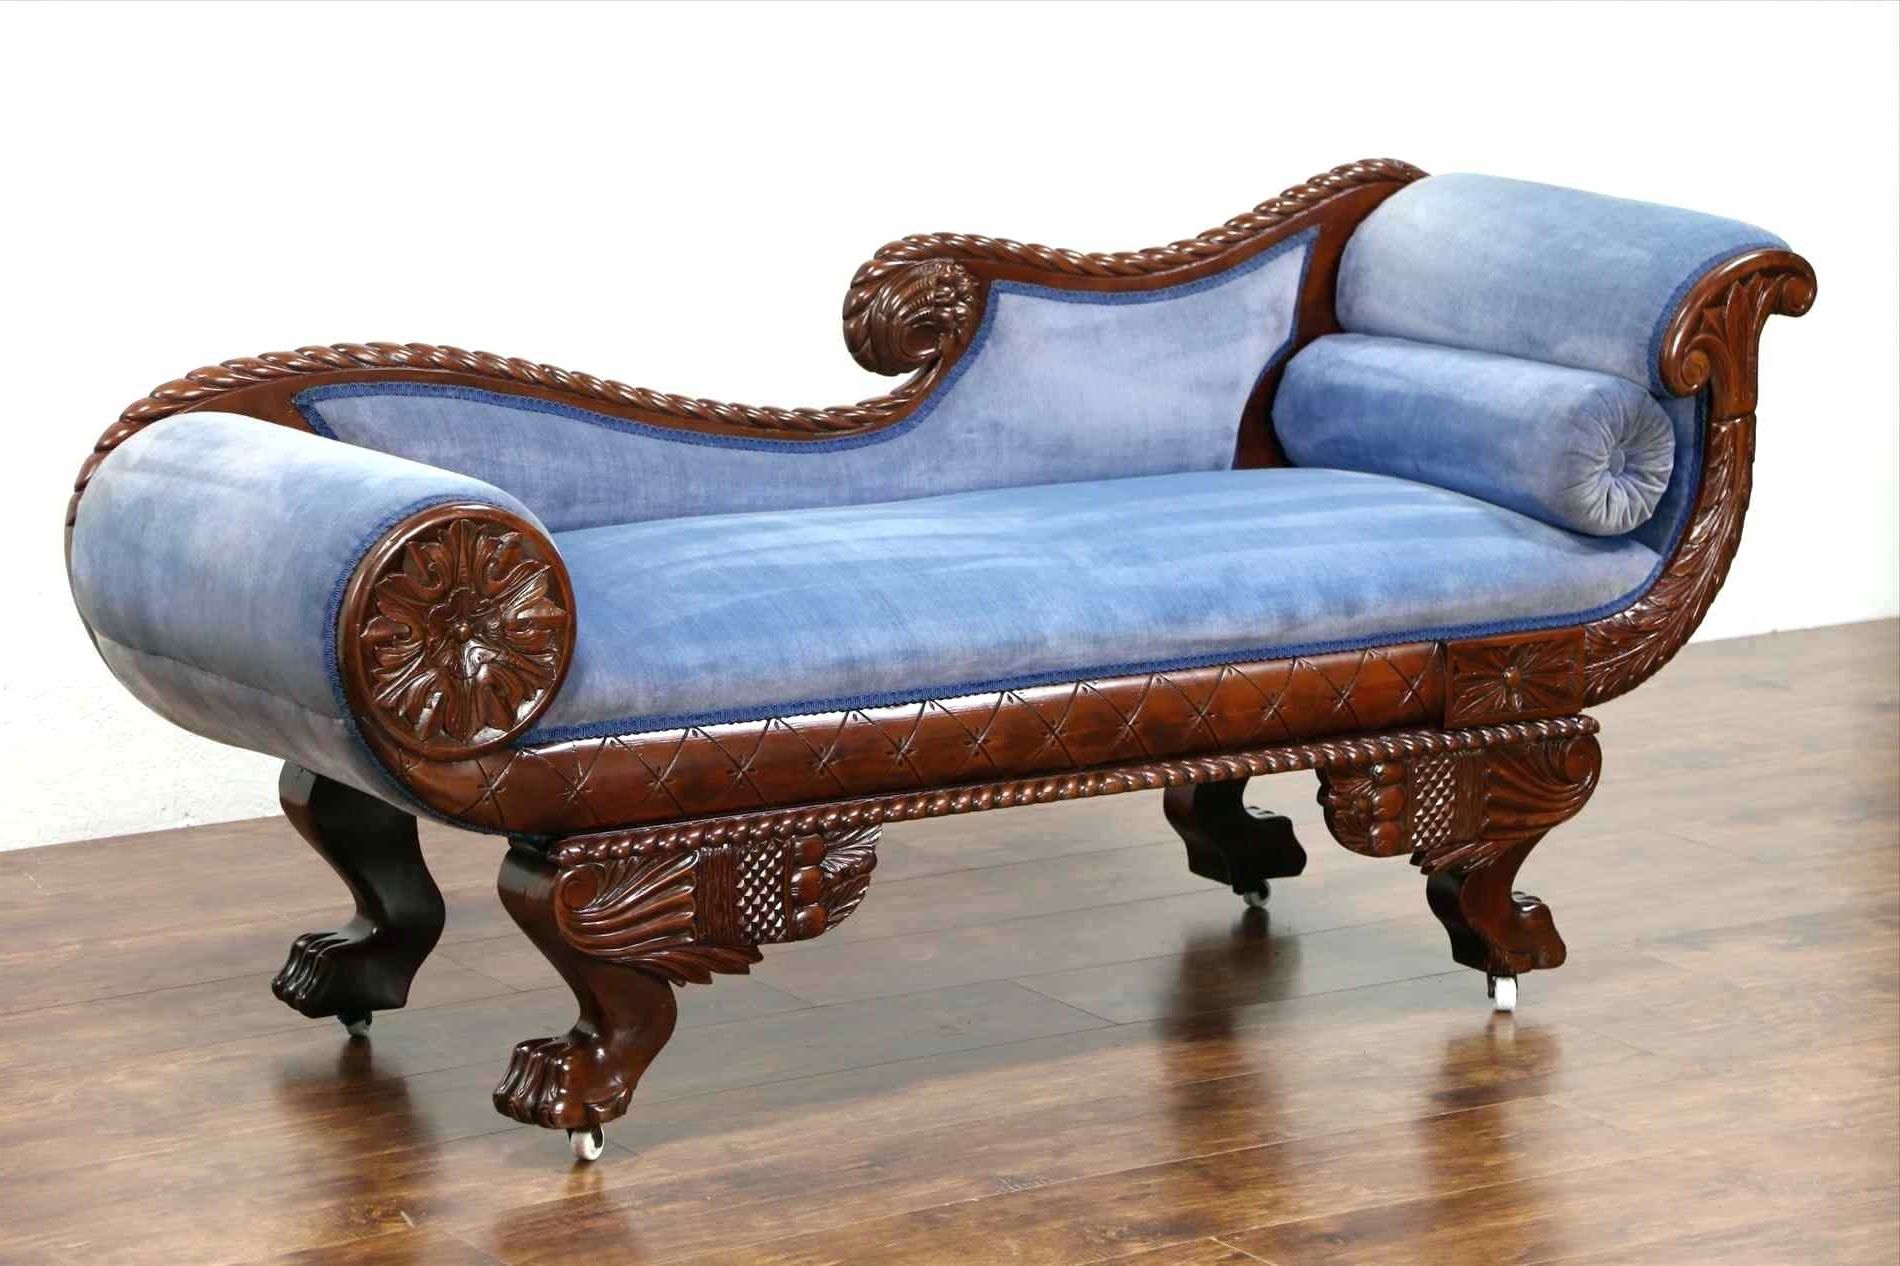 Vintage Chaise Lounge Chairs Throughout Current Antique Chaise Lounge Chair • Lounge Chairs Ideas (View 10 of 15)